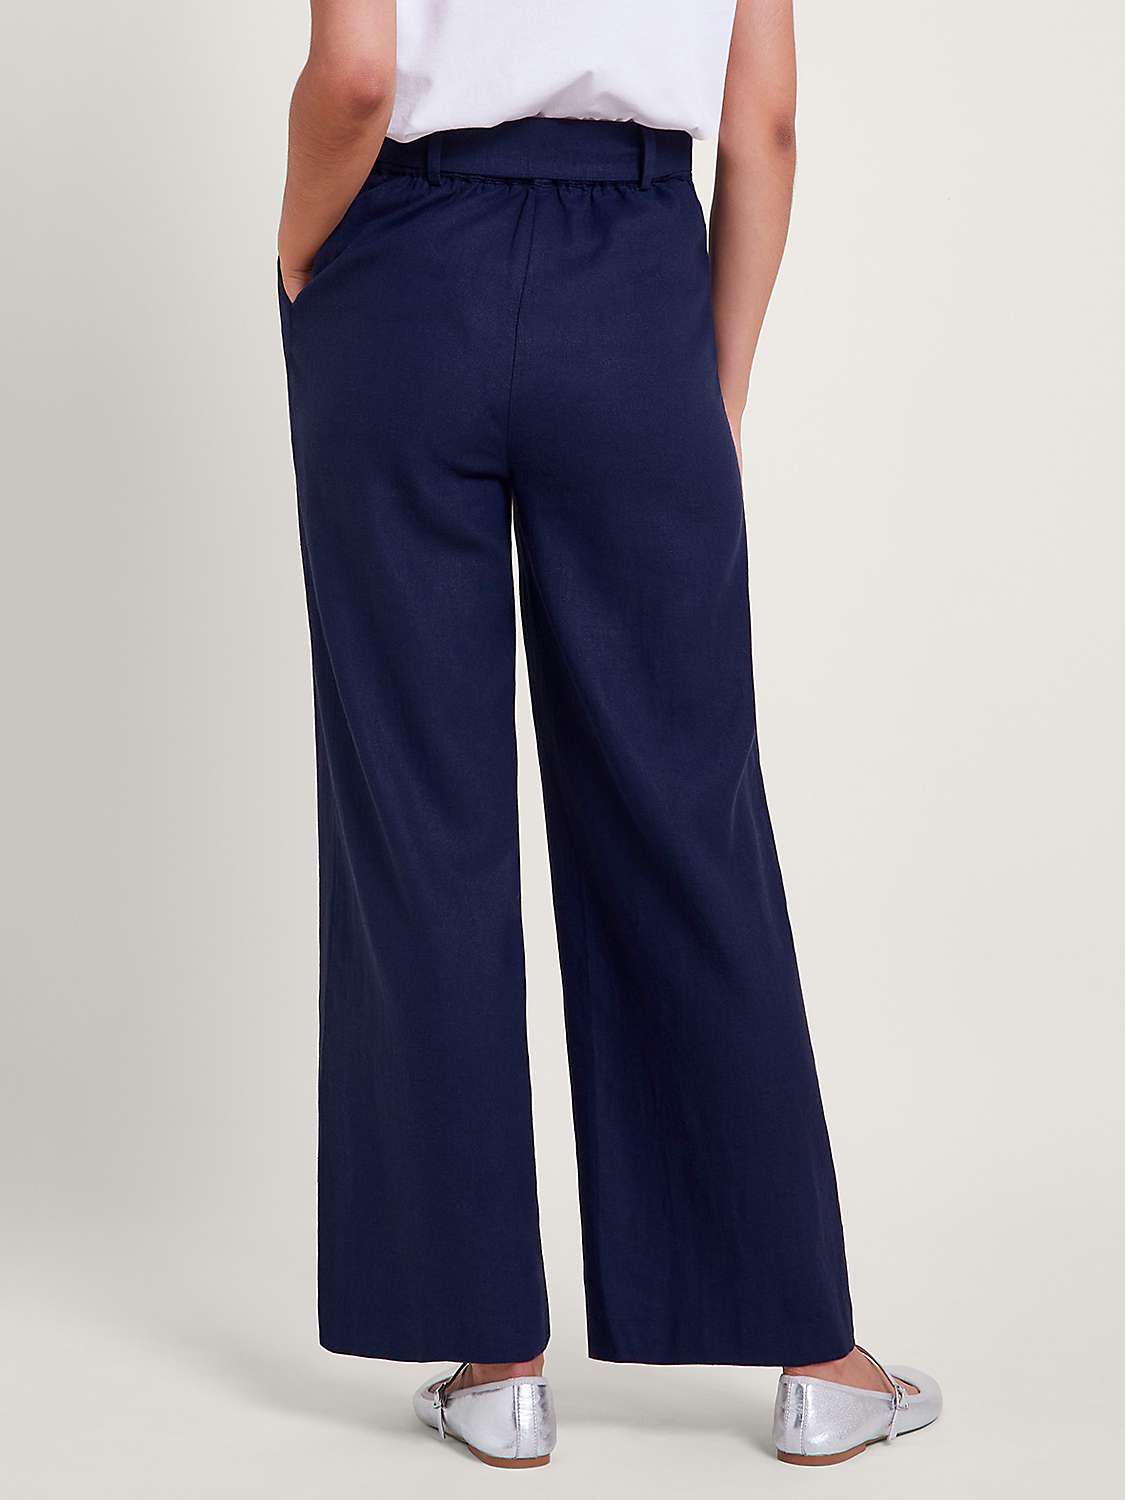 Buy Monsoon Mabel Linen Blend Trousers, Navy Online at johnlewis.com